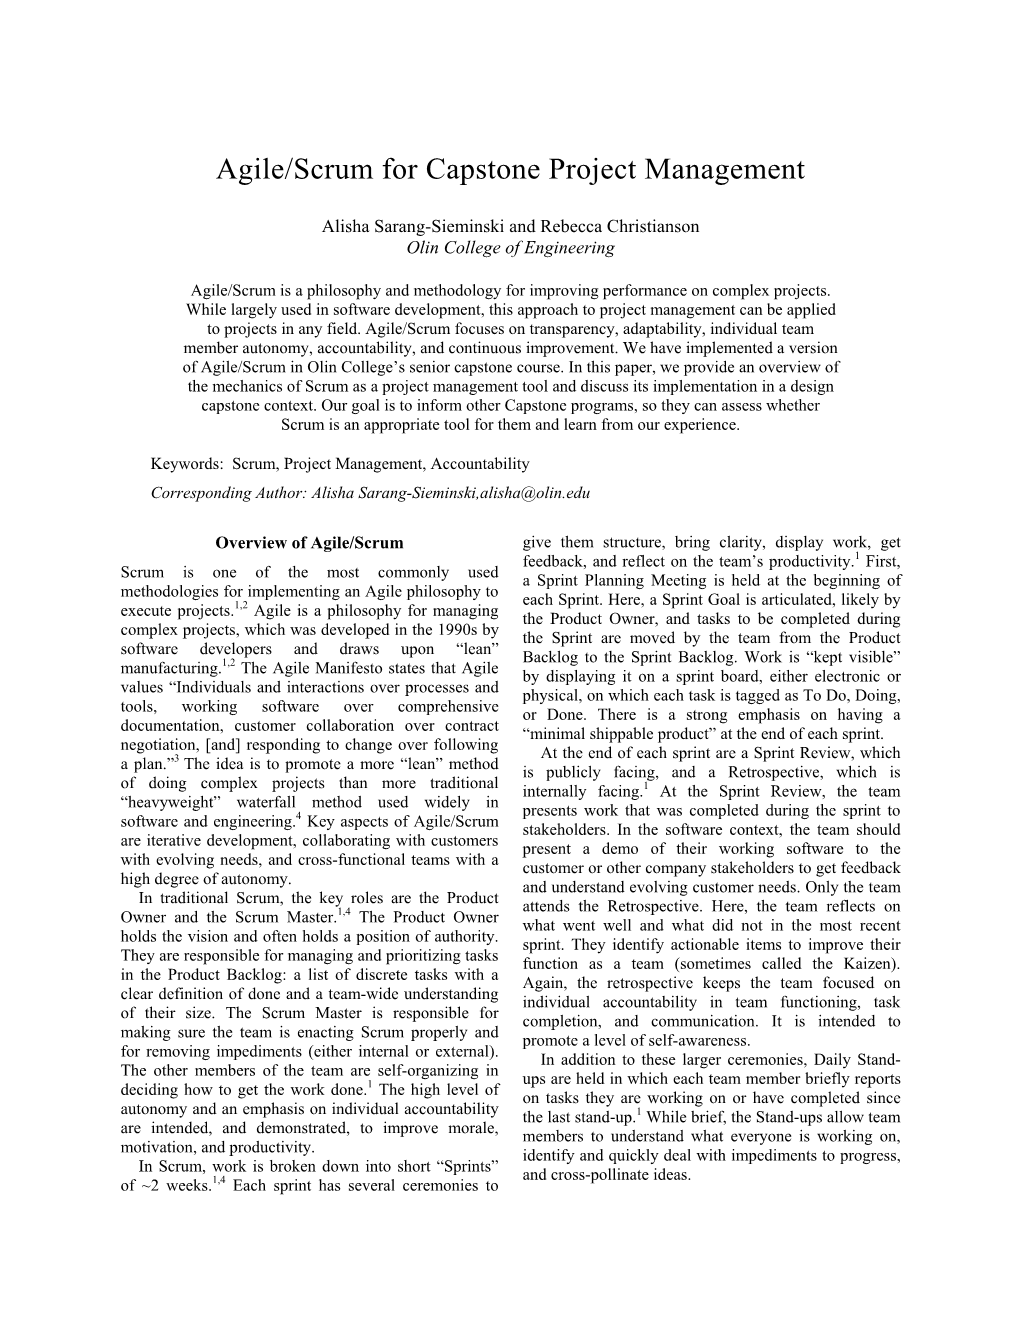 Agile/Scrum for Capstone Project Management